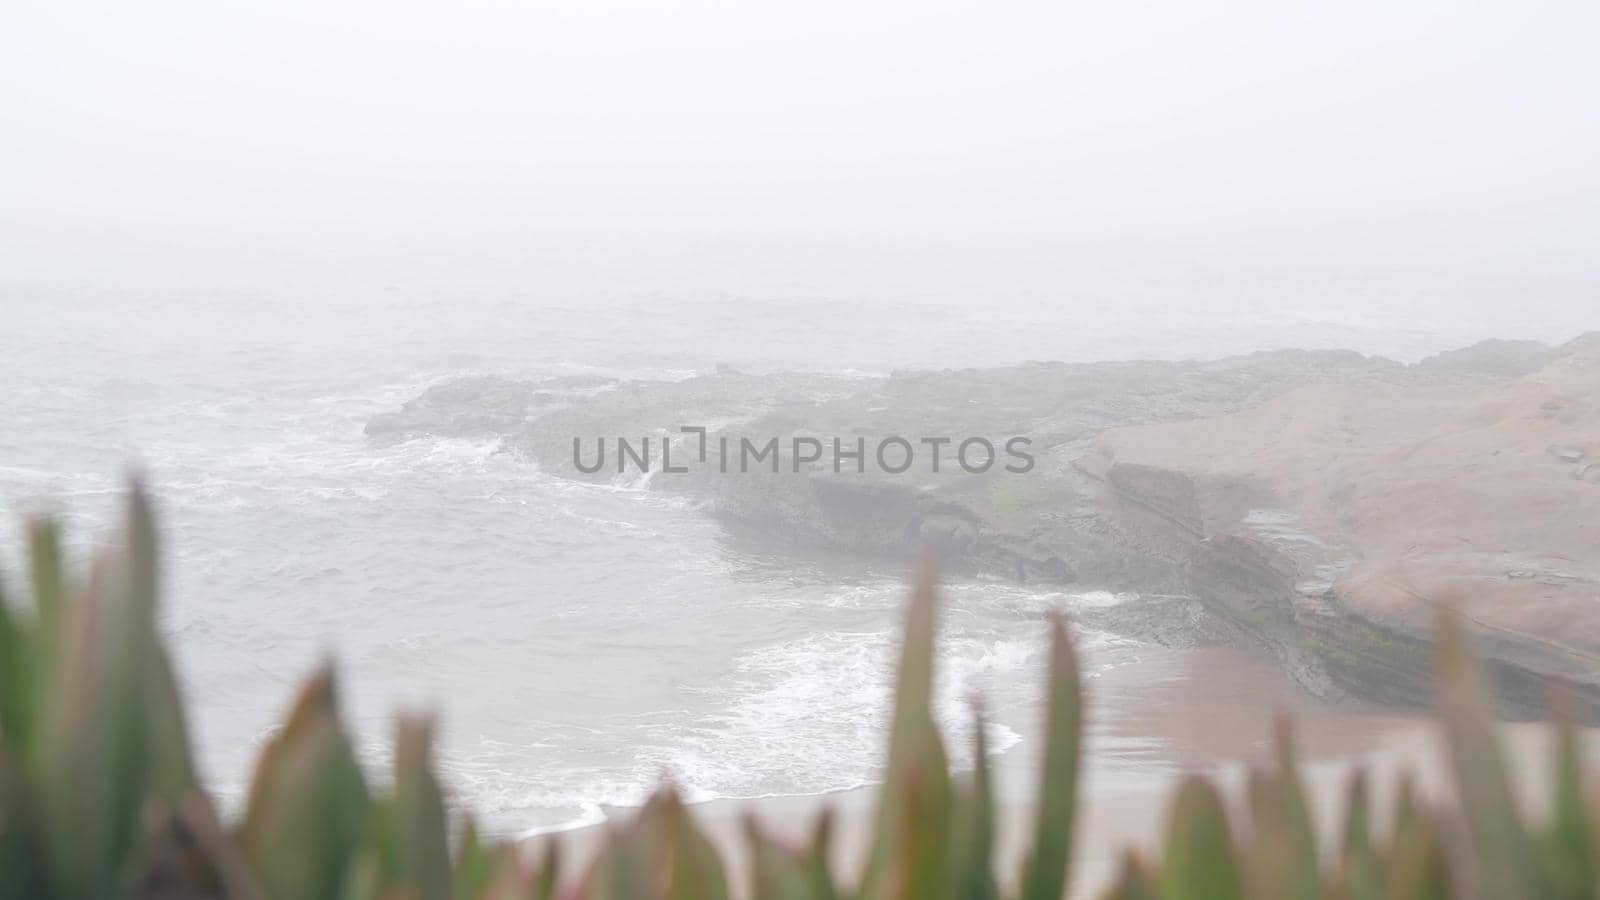 Foggy sea landscape, waves crashing on ocean beach in haze, misty weather. Calm tranquil moody atmosphere, grey seascape, gloomy dramatic California coast, stormy water. Seamless looped cinemagraph.